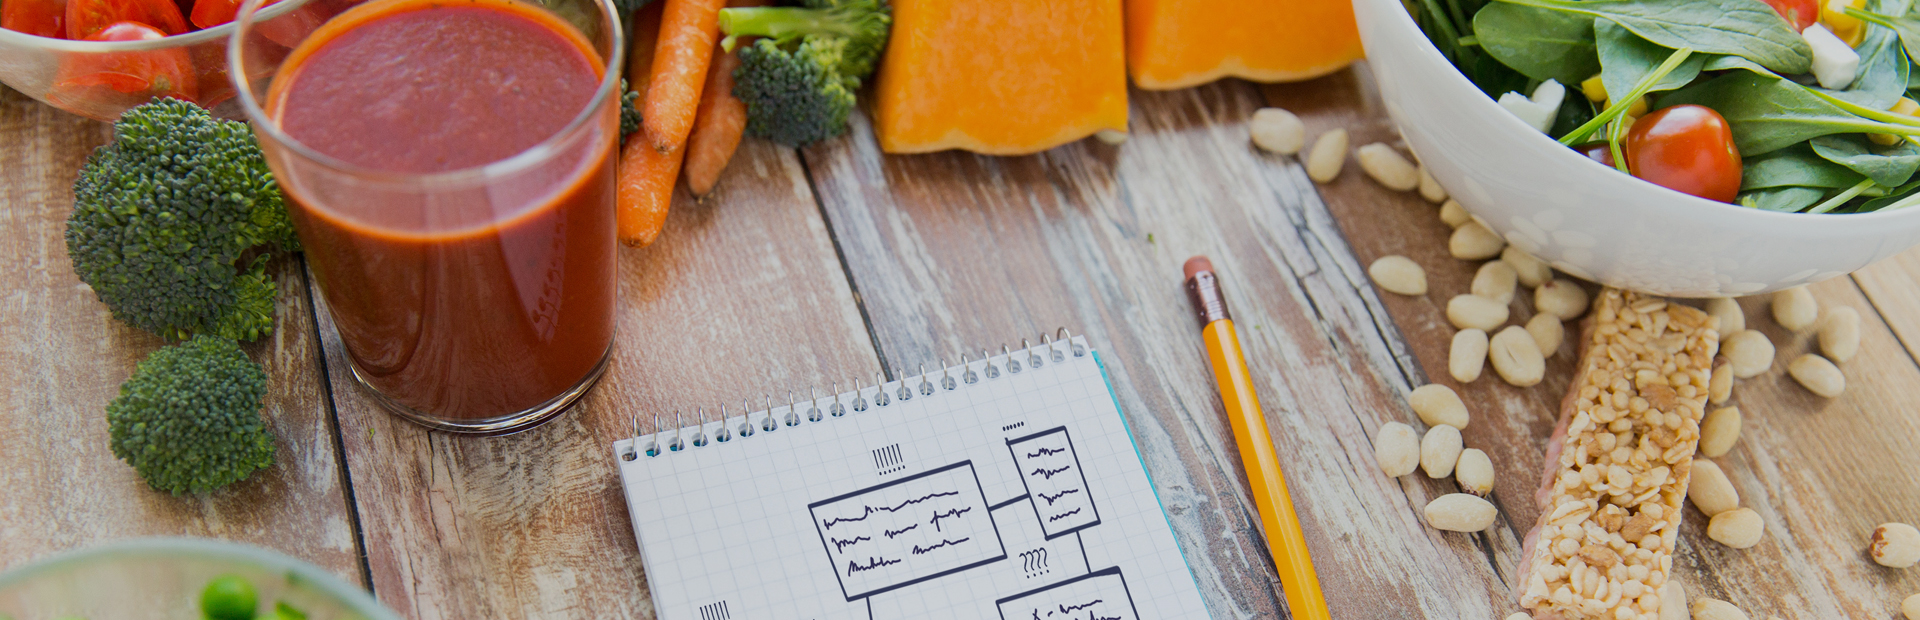 A nutritionist's notepad